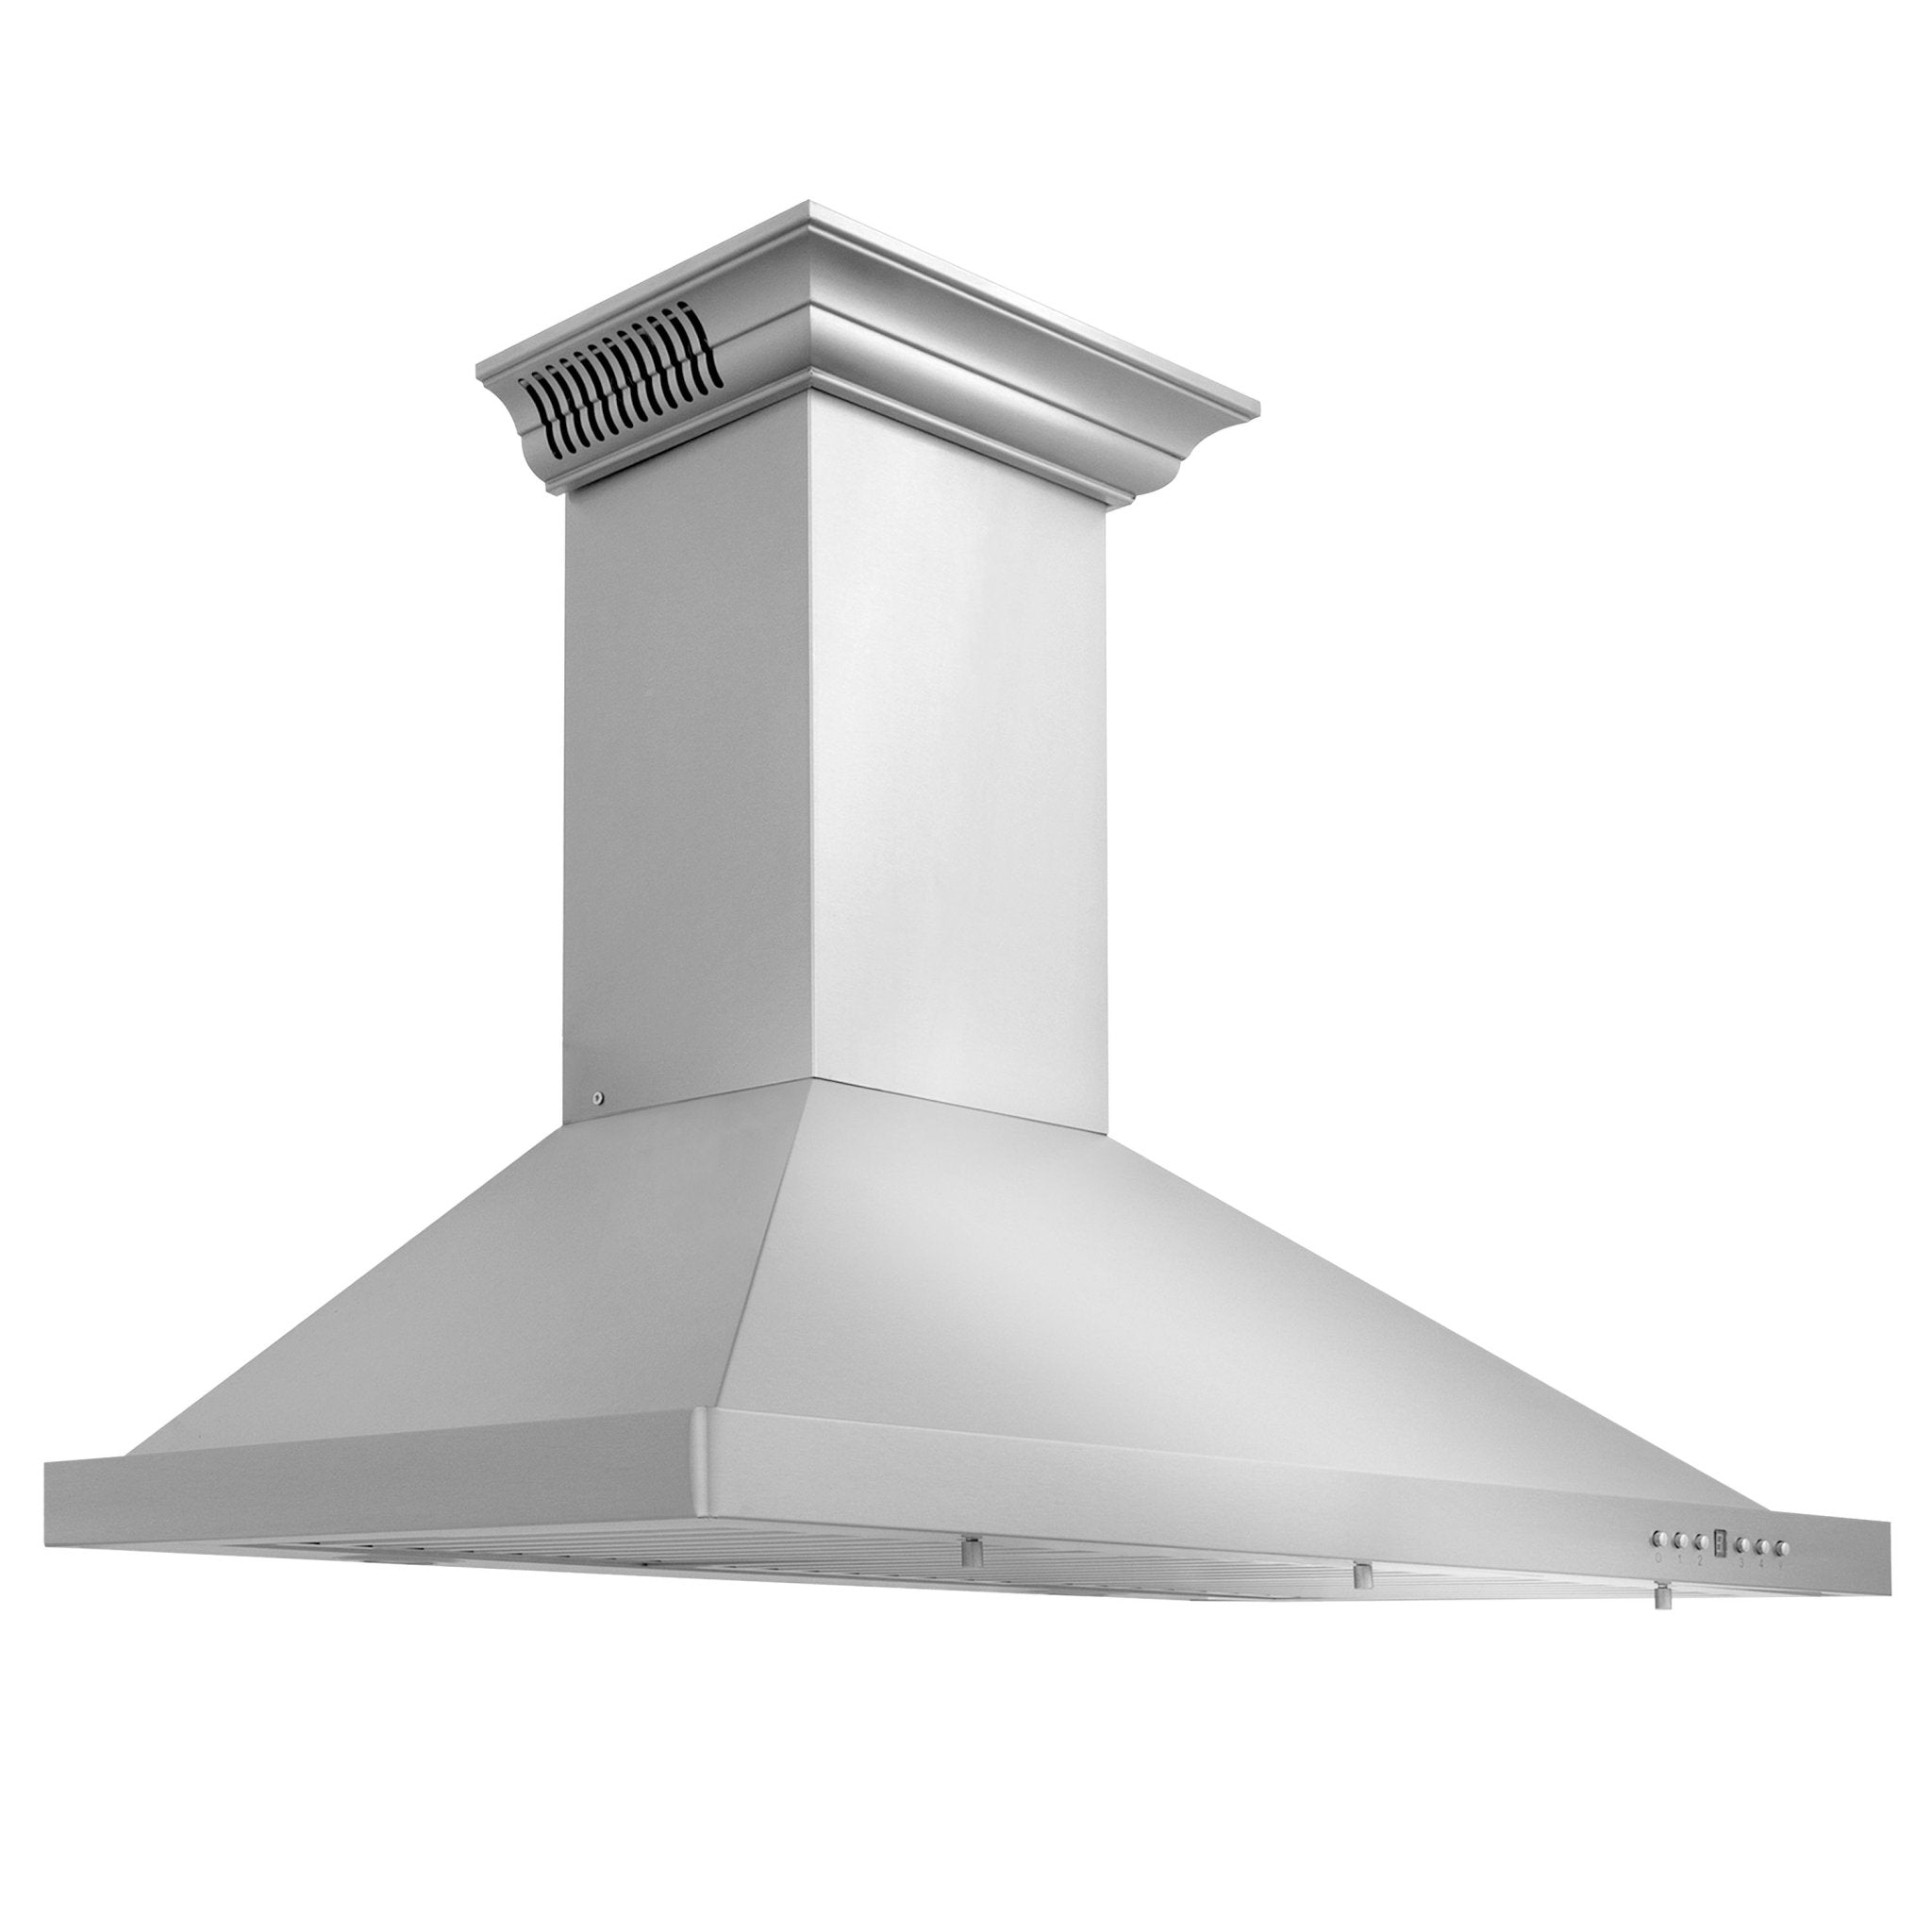 24" ZLINE CrownSound‚ Ducted Vent Wall Mount Range Hood in Stainless Steel with Built-in Bluetooth Speakers (KBCRN-BT-24)